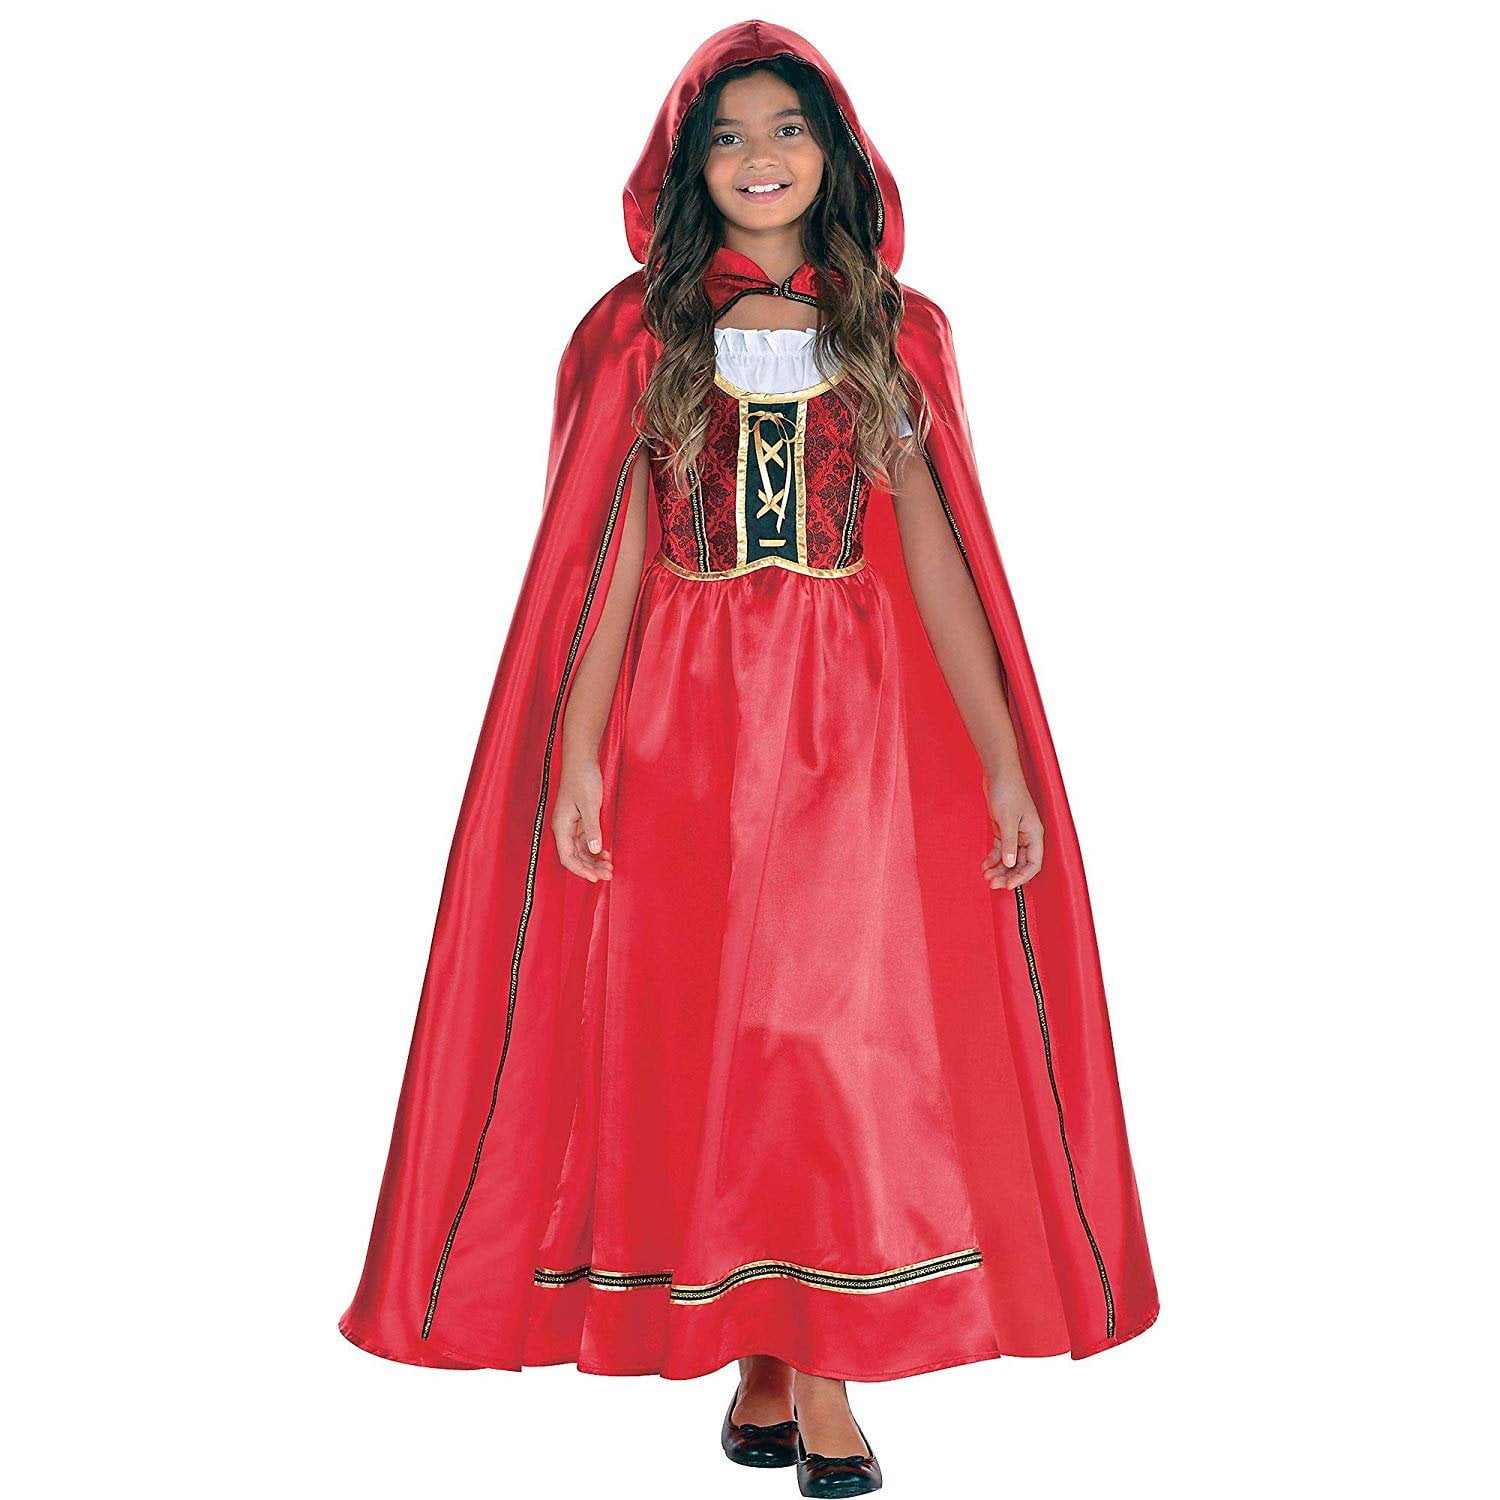 Adult Red Riding Hood Costume Fairy-tale Fancy Dress Hooded Cape XL 12 14 